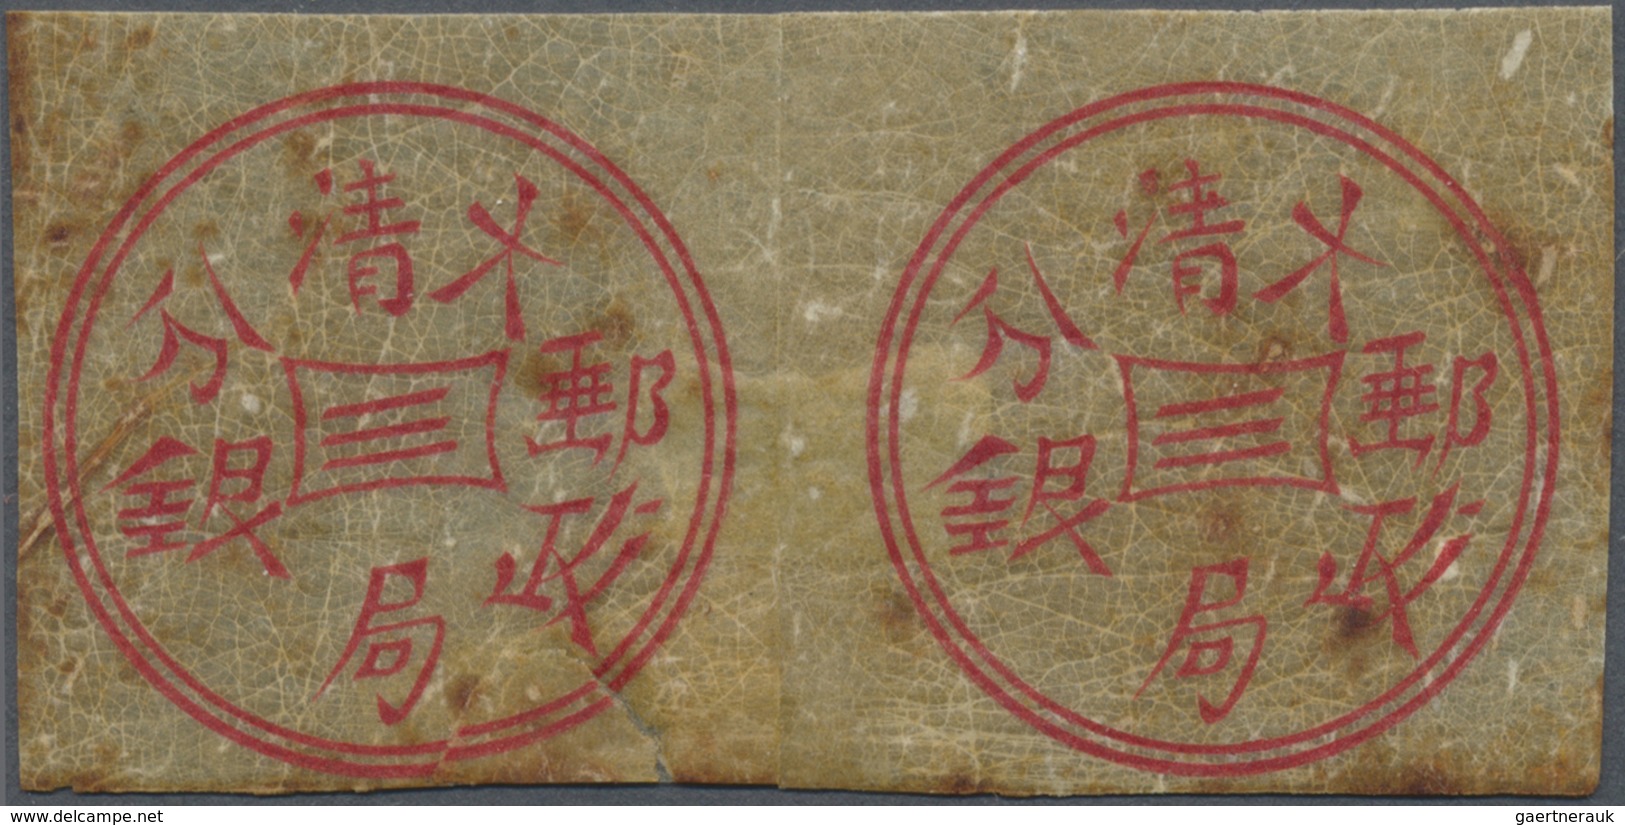 * China: 1870s (approx.), So Called Imperial China Essay Of 3 Cand. In Red On White Gummed Paper, Repo - Other & Unclassified